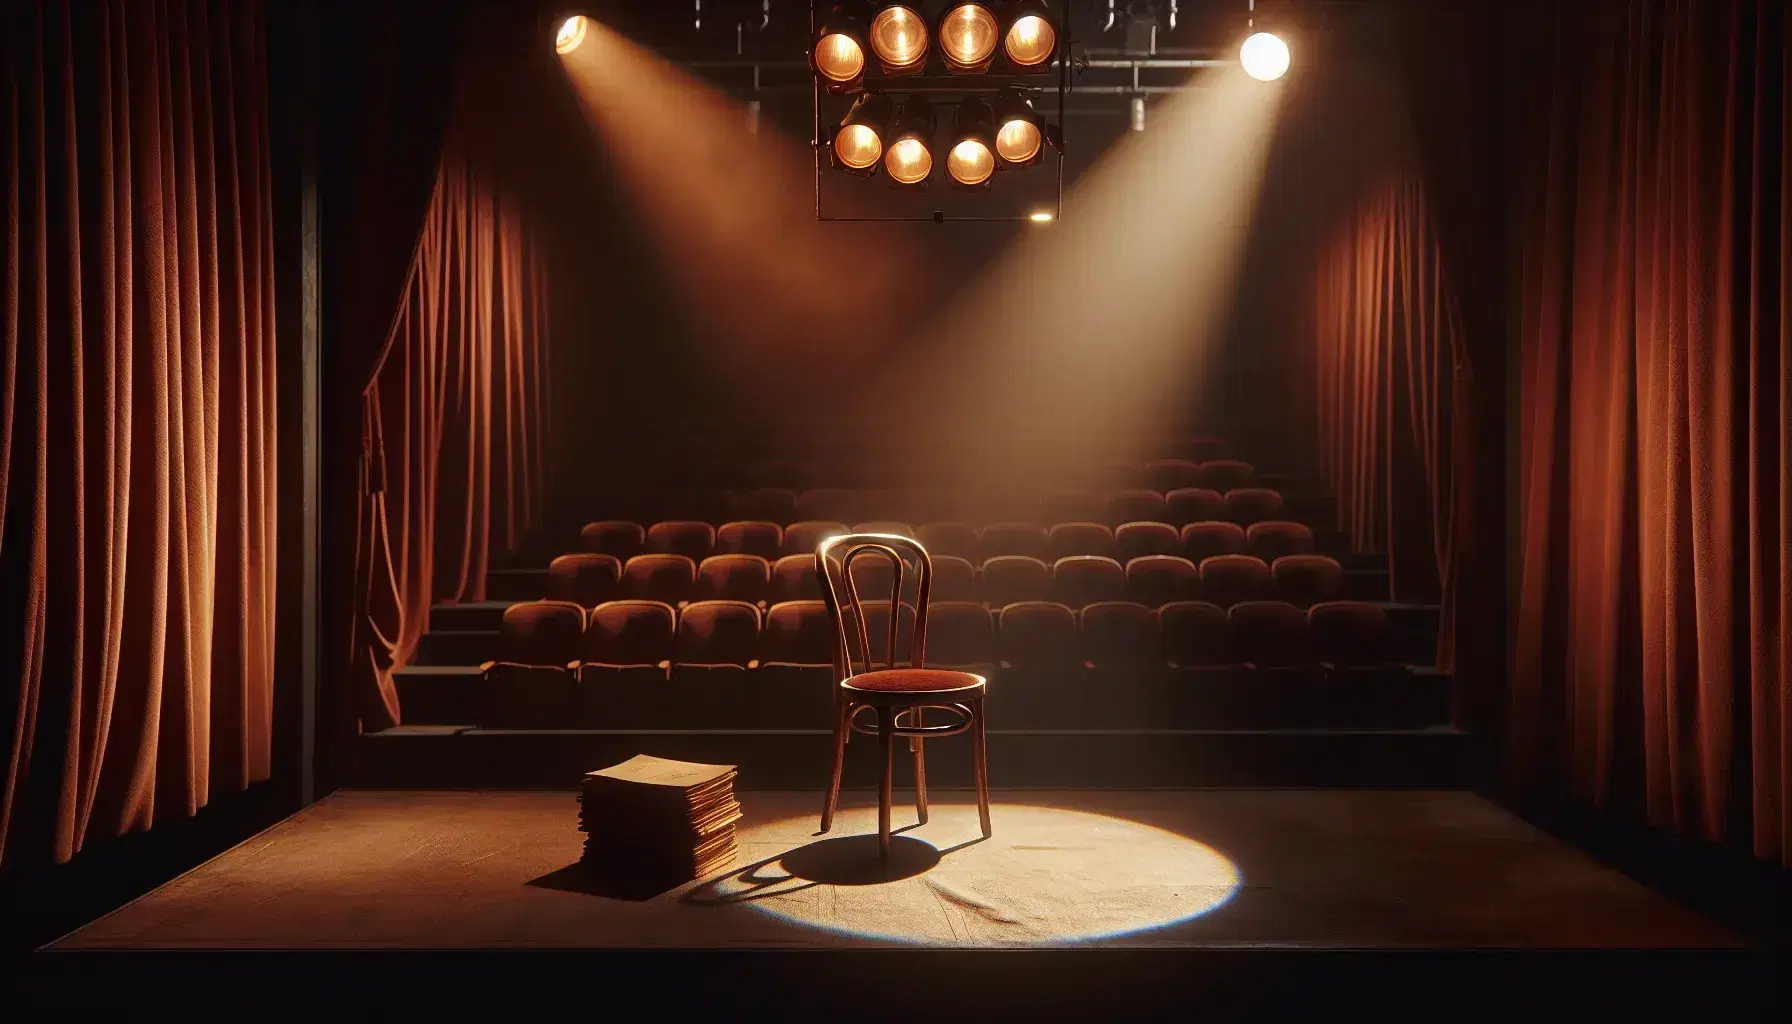 Intimate theater stage with warm lighting, a vintage wooden chair center stage, a stack of scripts, a single spotlight, and plush red curtains.